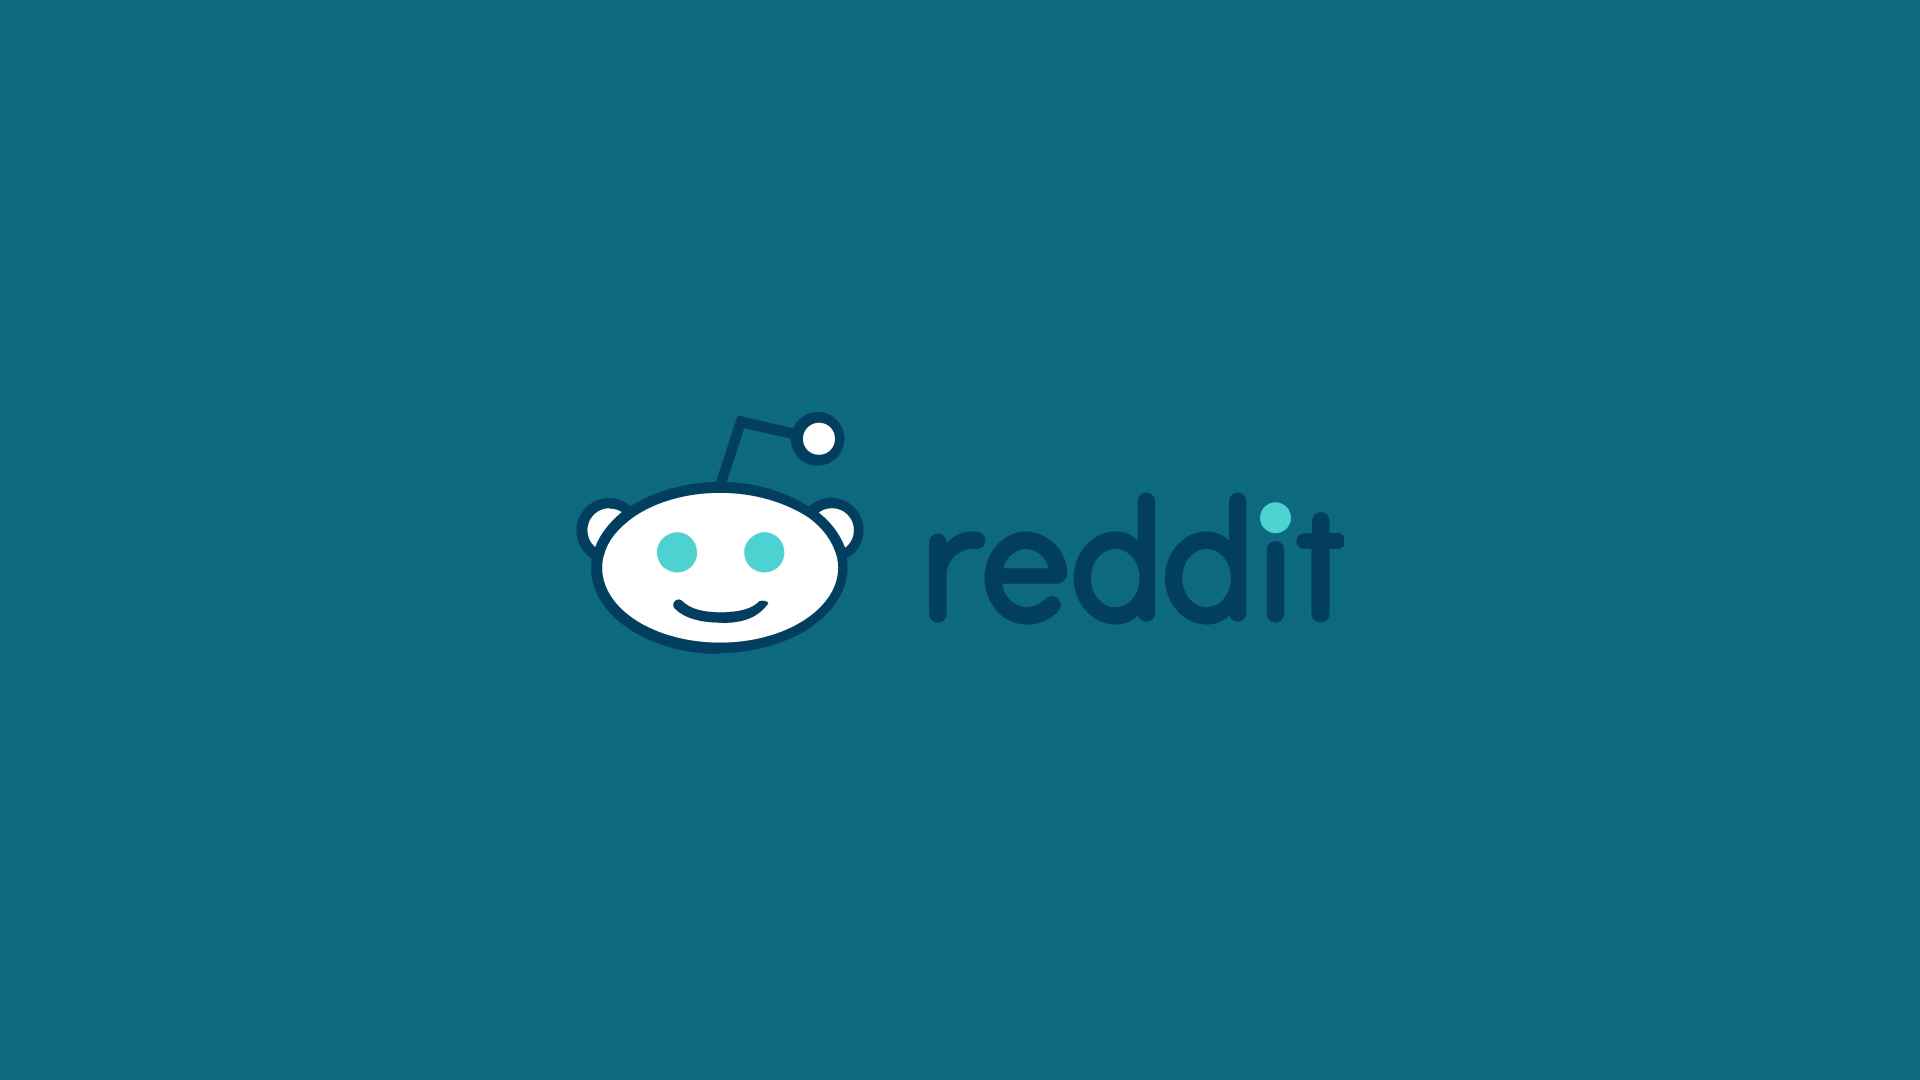 Can Reddit be used for self-promotion, advertising, or marketing purposes?